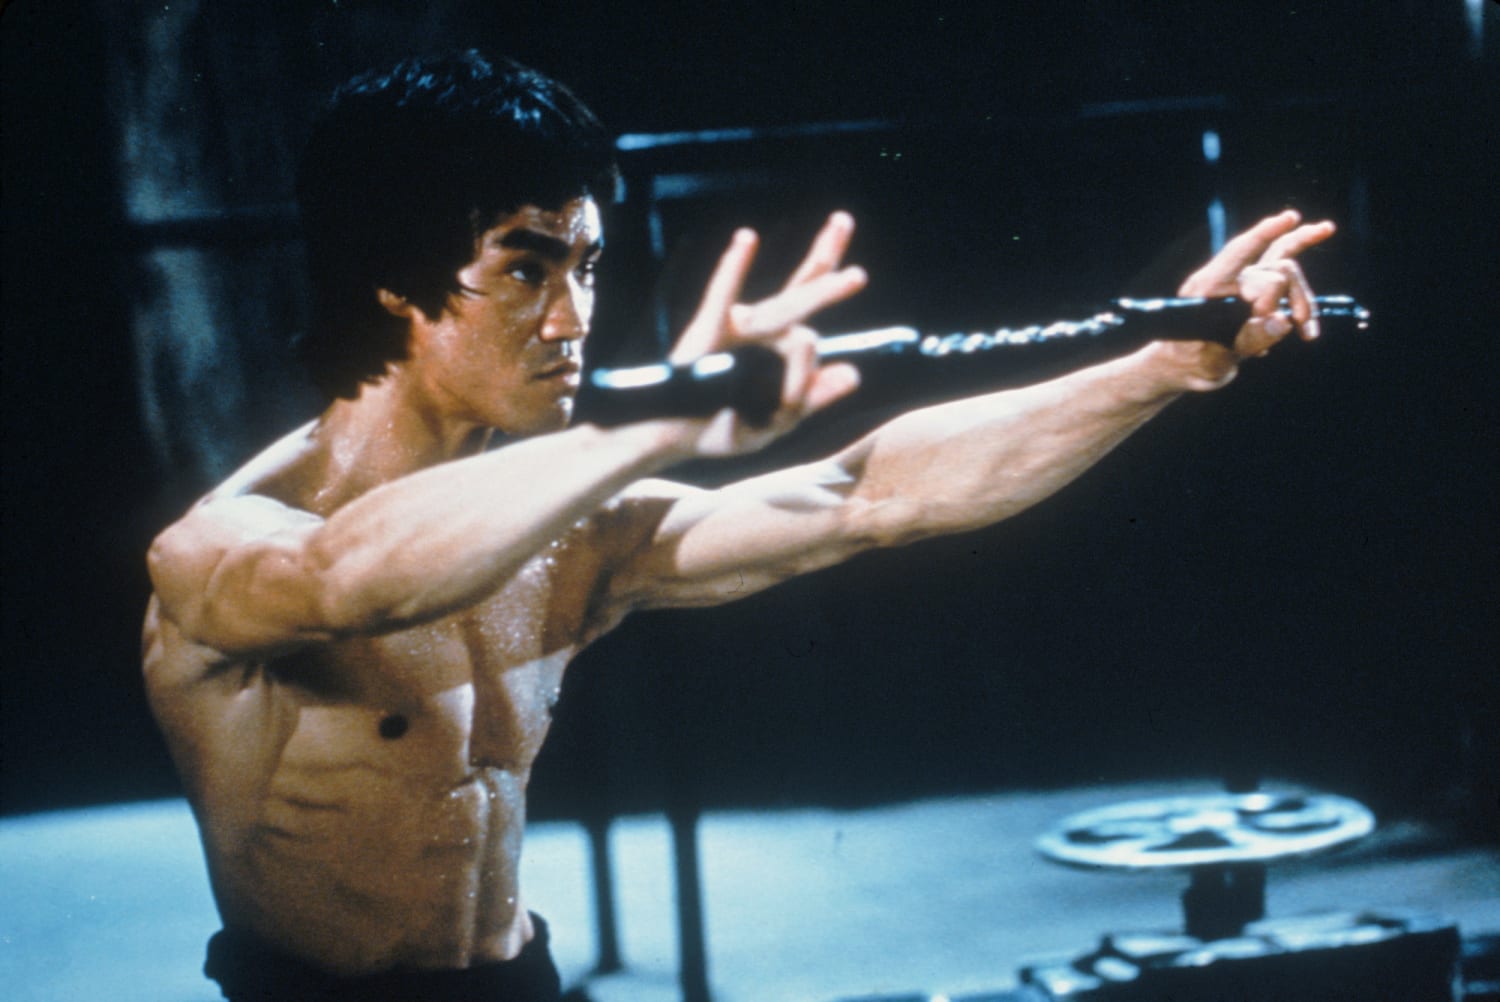 Bruce Lee-Inspired TV Drama 'Warrior' Ordered by Cinemax